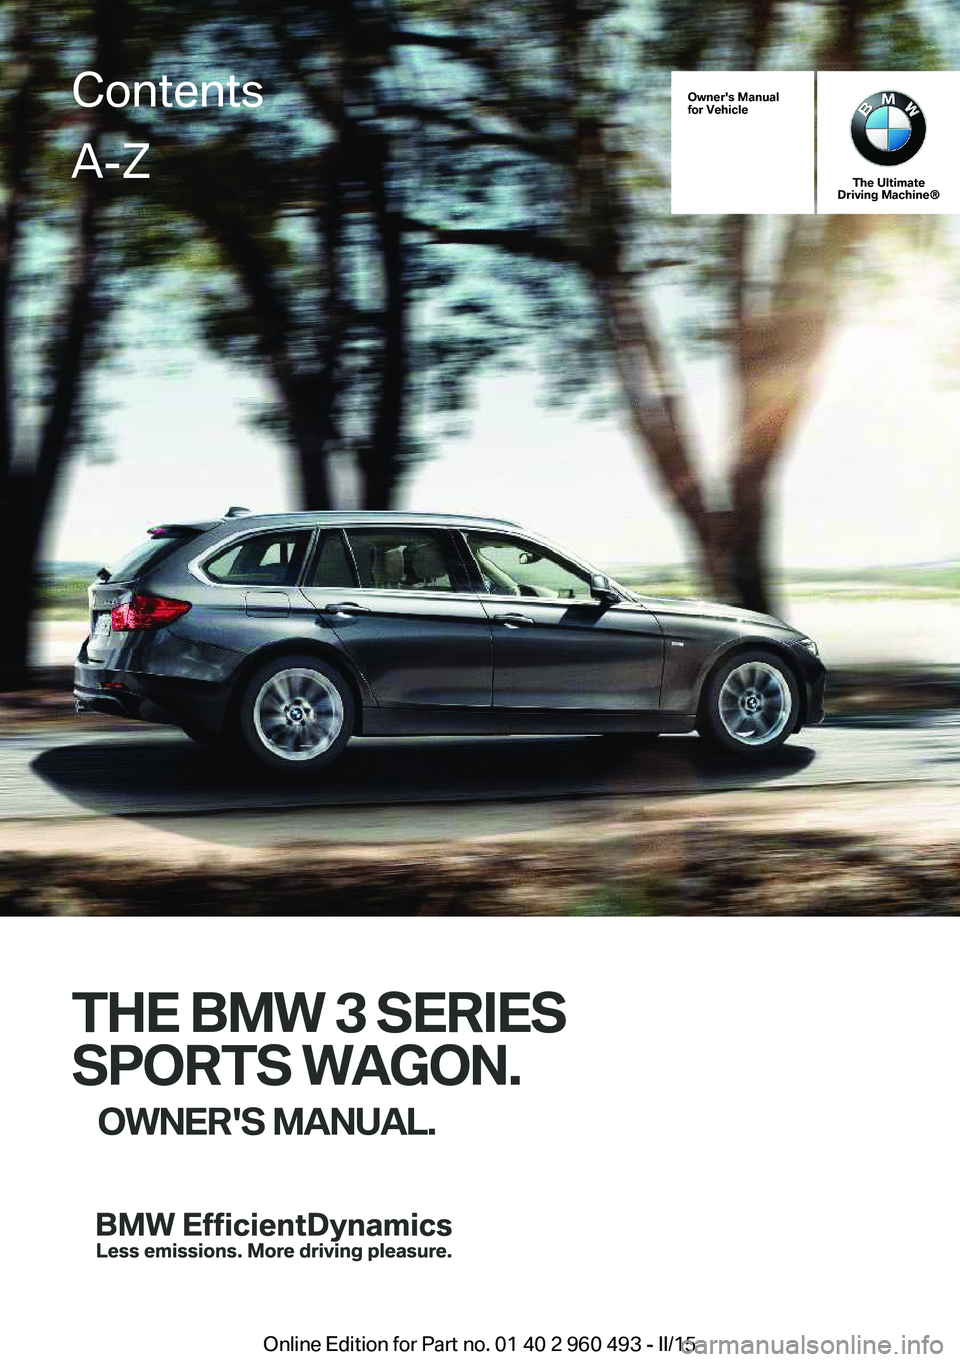 BMW 328I XDRIVE SPORTS WAGON 2016  Owners Manual Owner's Manual
for Vehicle
The Ultimate
Driving Machine®
THE BMW 3 SERIES
SPORTS WAGON. OWNER'S MANUAL.
ContentsA-Z
Online Edition for Part no. 01 40 2 960 493 - II/15   